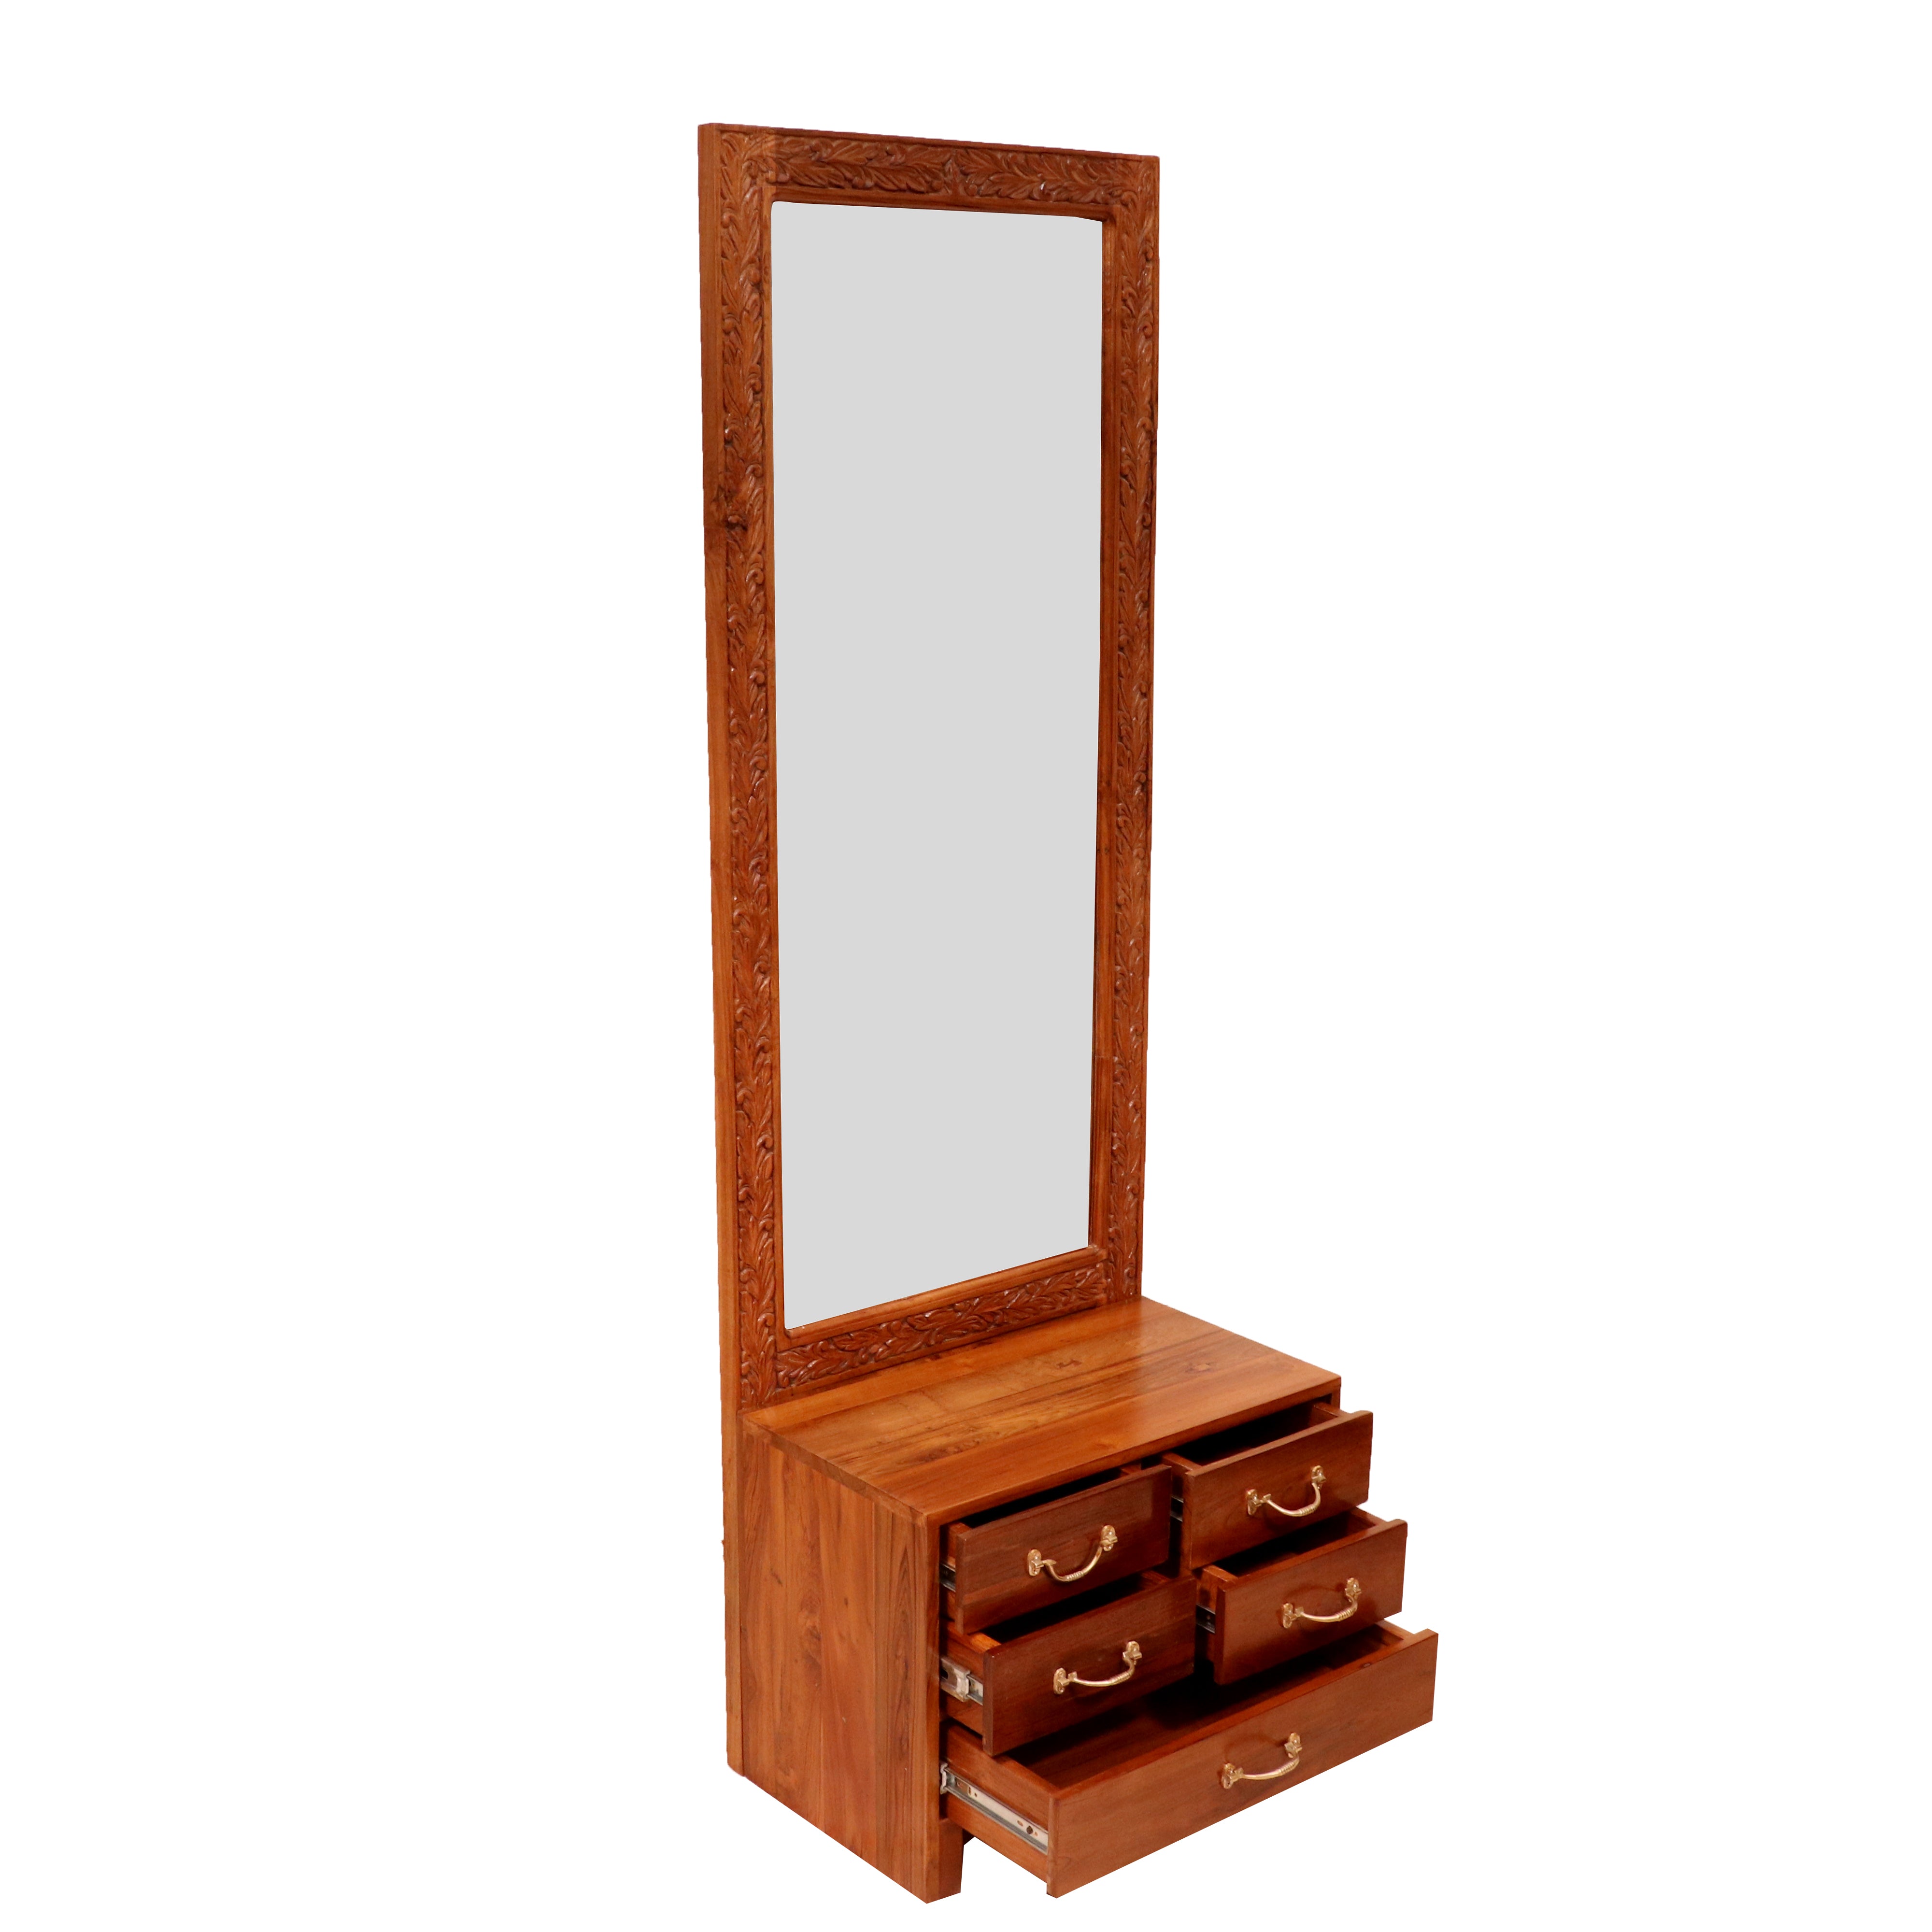 Solid teak wood carved mirror frame with 5 drawer Dressing table Dressing Table